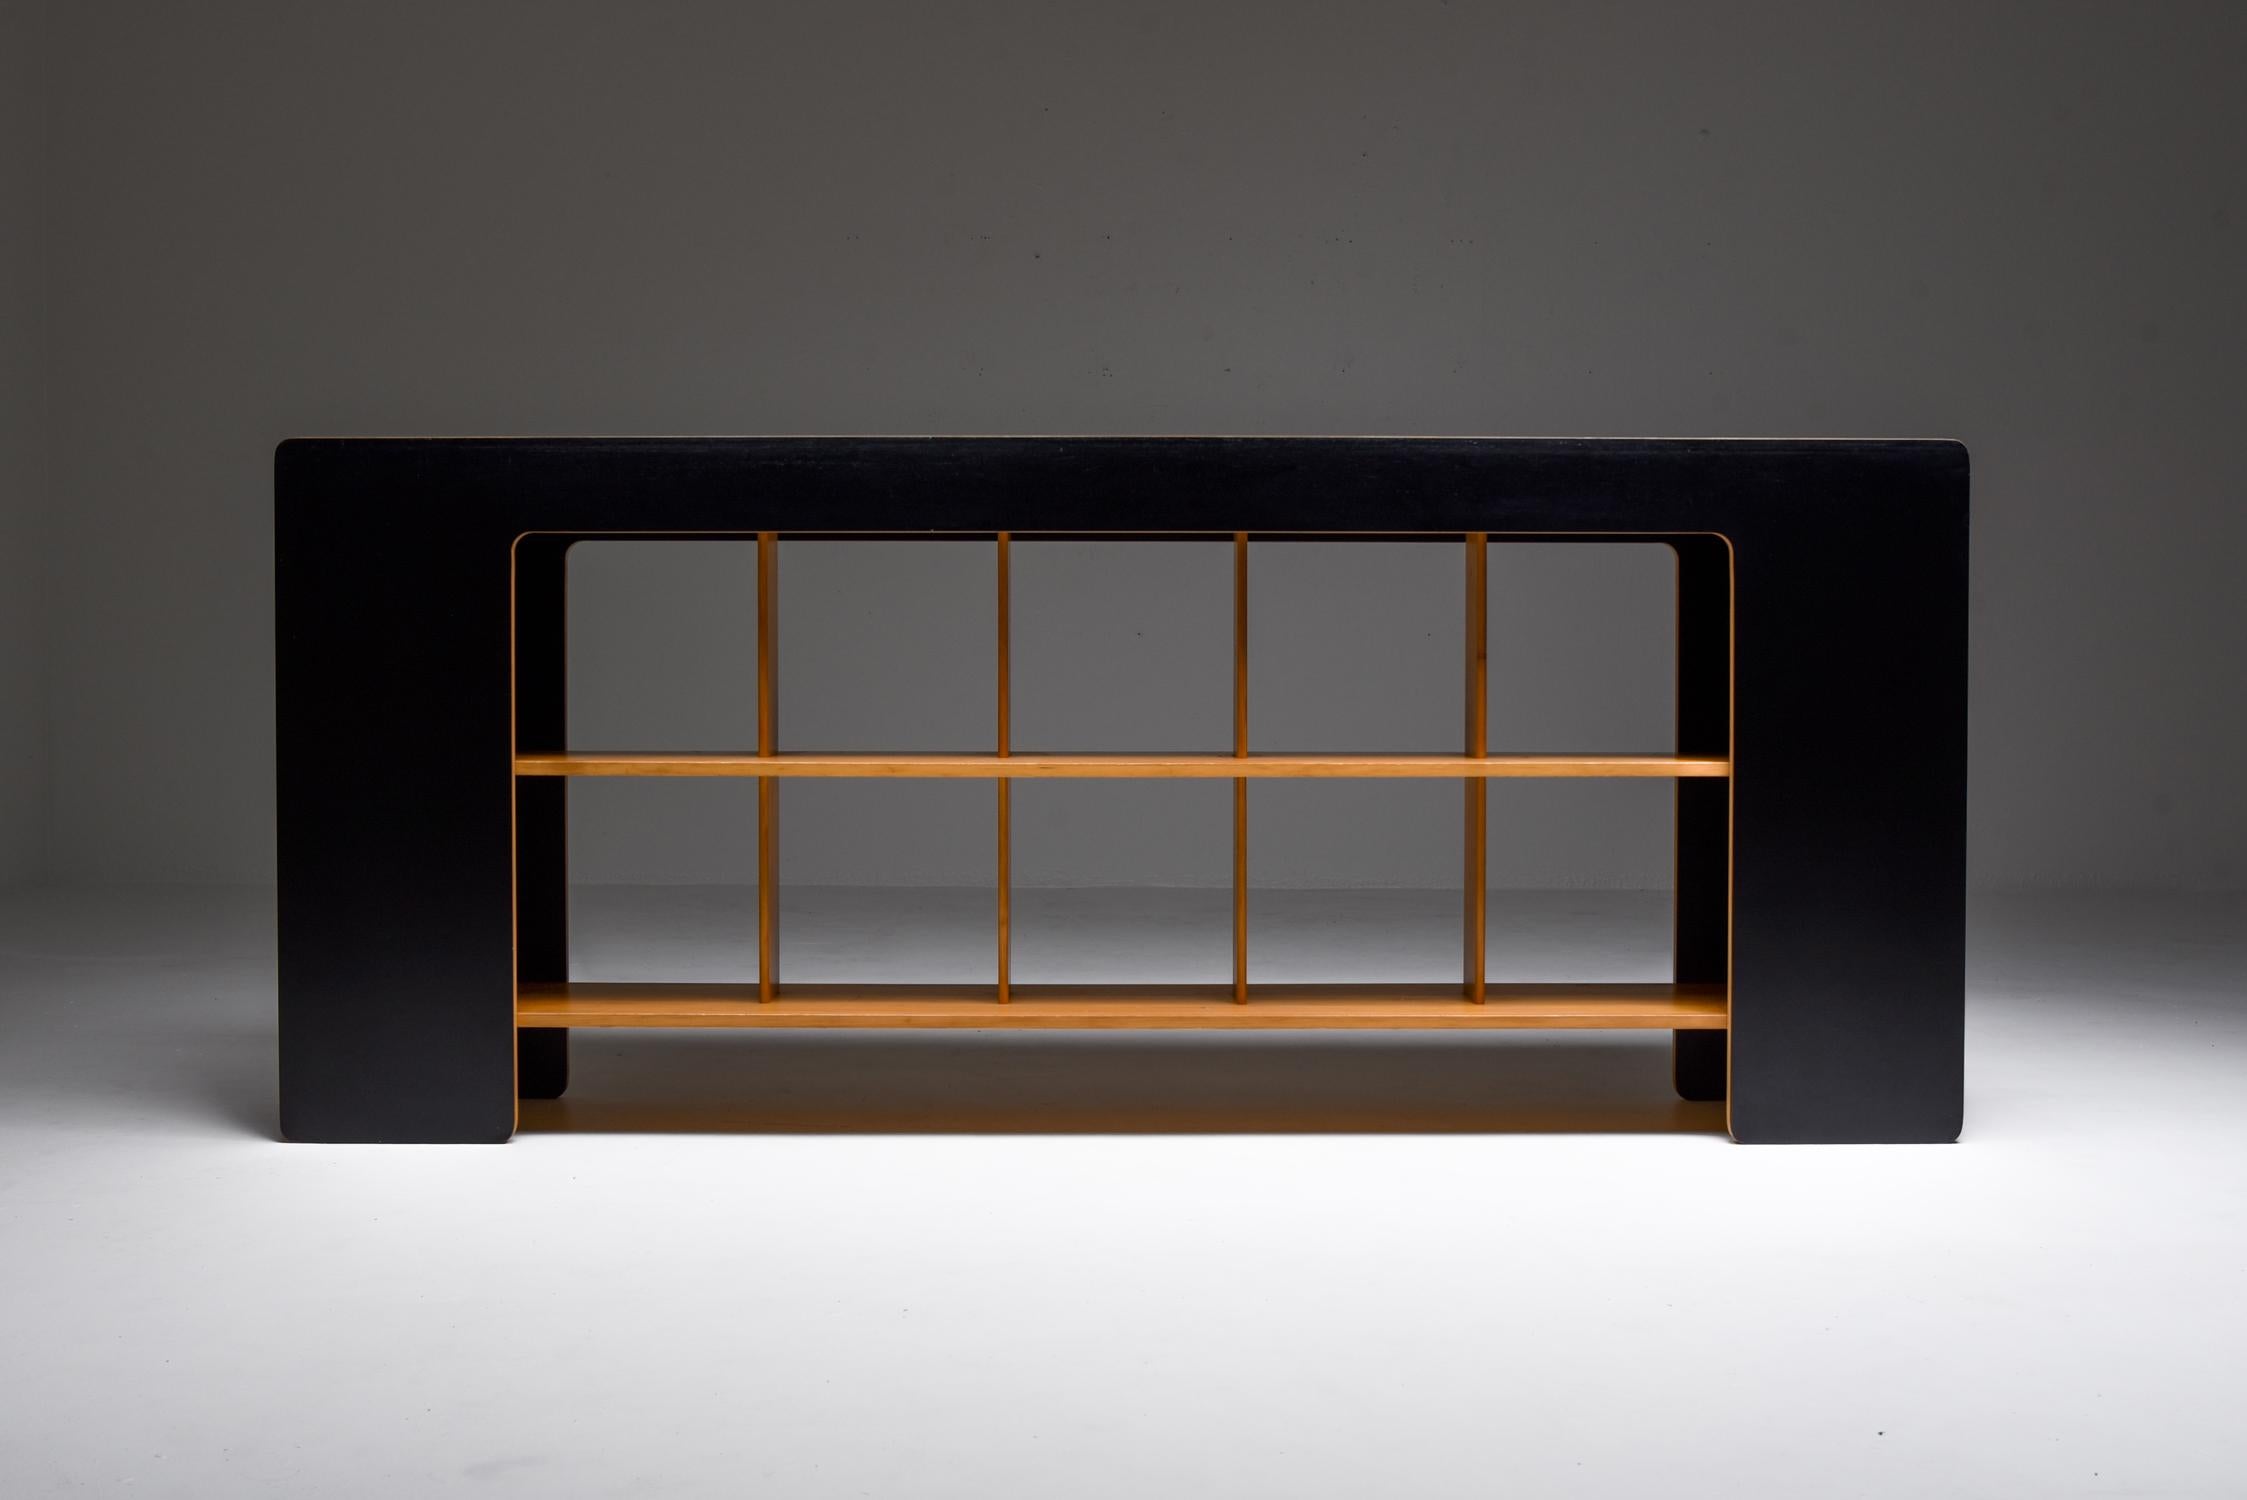 Roberto Pamio and Renato Toso, sideboard with shelves, room divider, Stilwood, Italy, 1972

Unusual post-modern Italian free standing shelve system in black Formica and blonde wood. A great and rare piece by the avant-garde designers Roberto Pamio